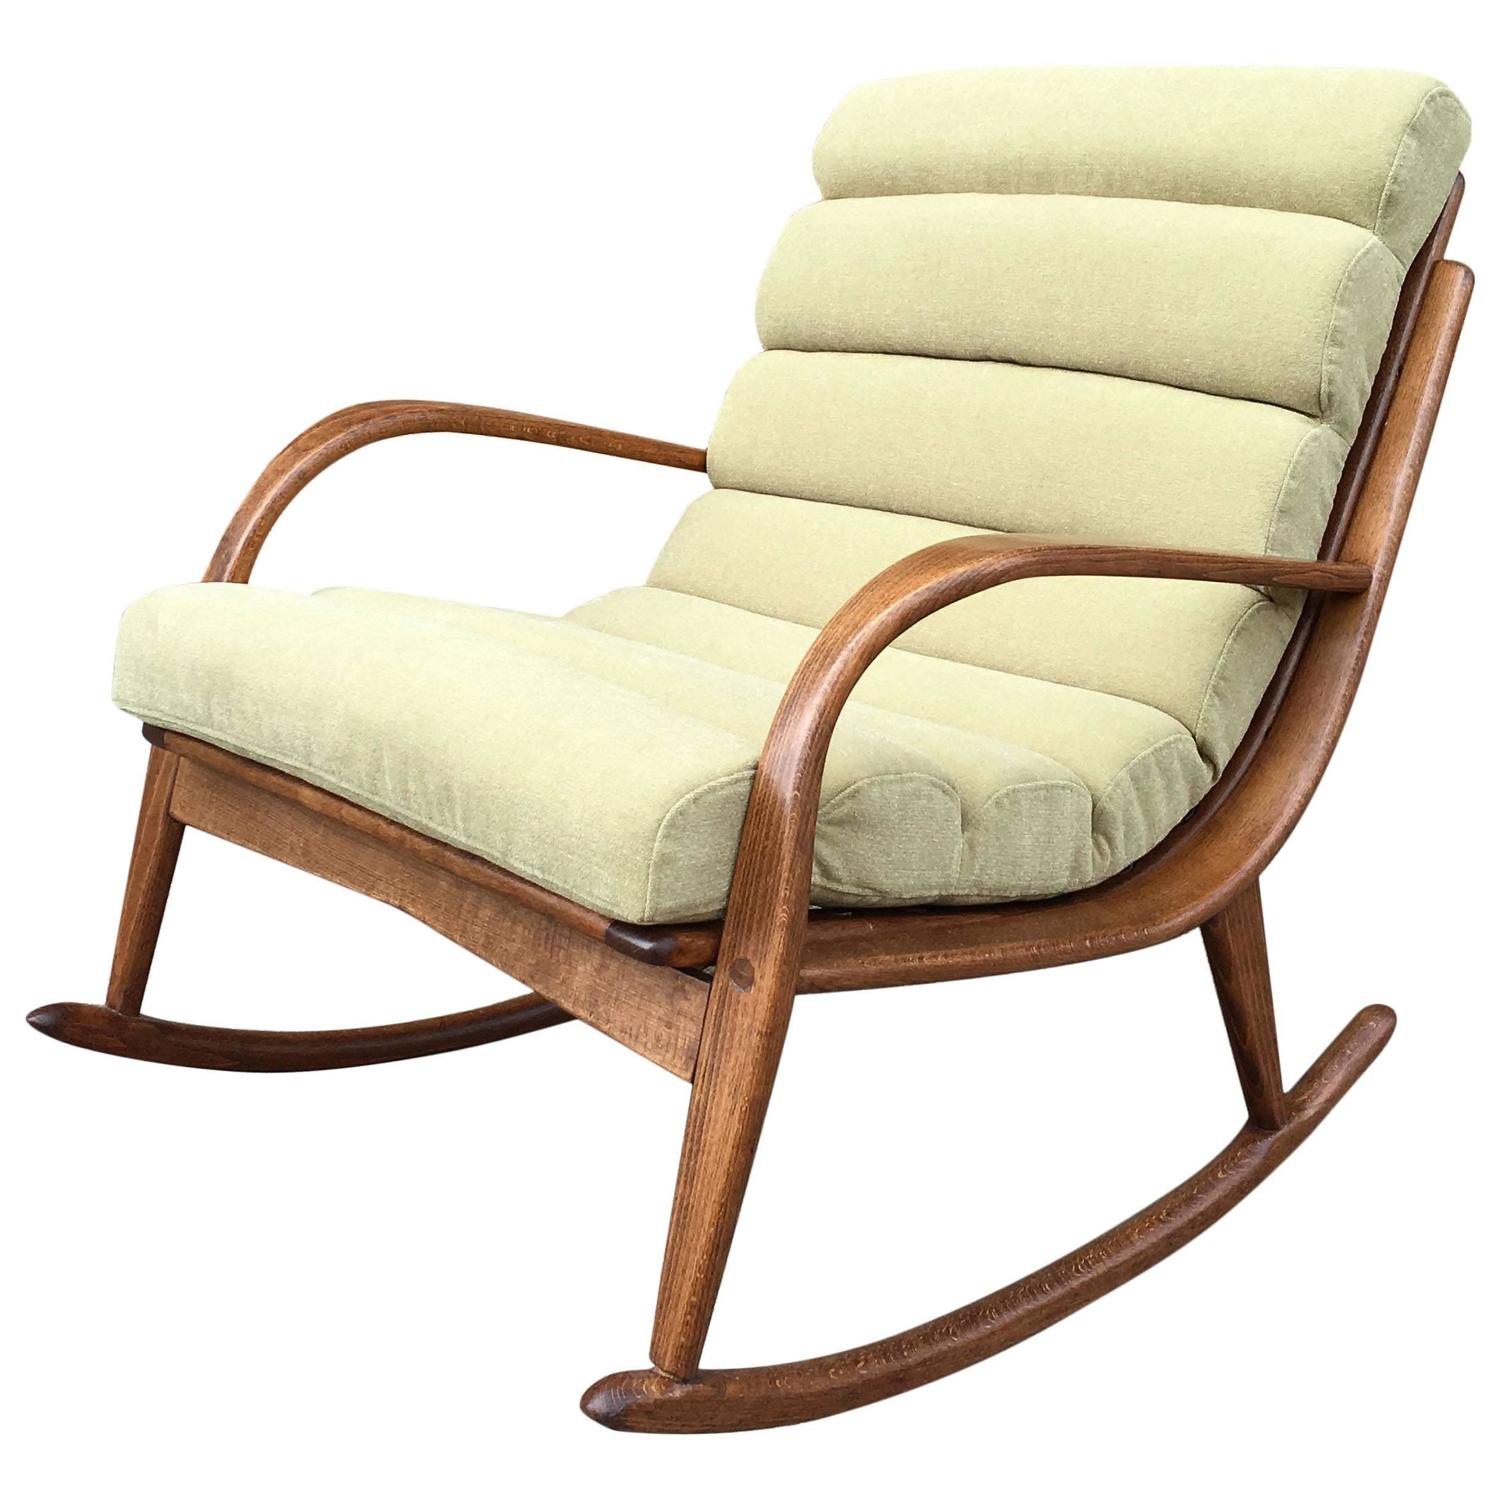 Extremely Rare Danish Modern Bentwood Upholstered Rocking Chair at 1stdibs